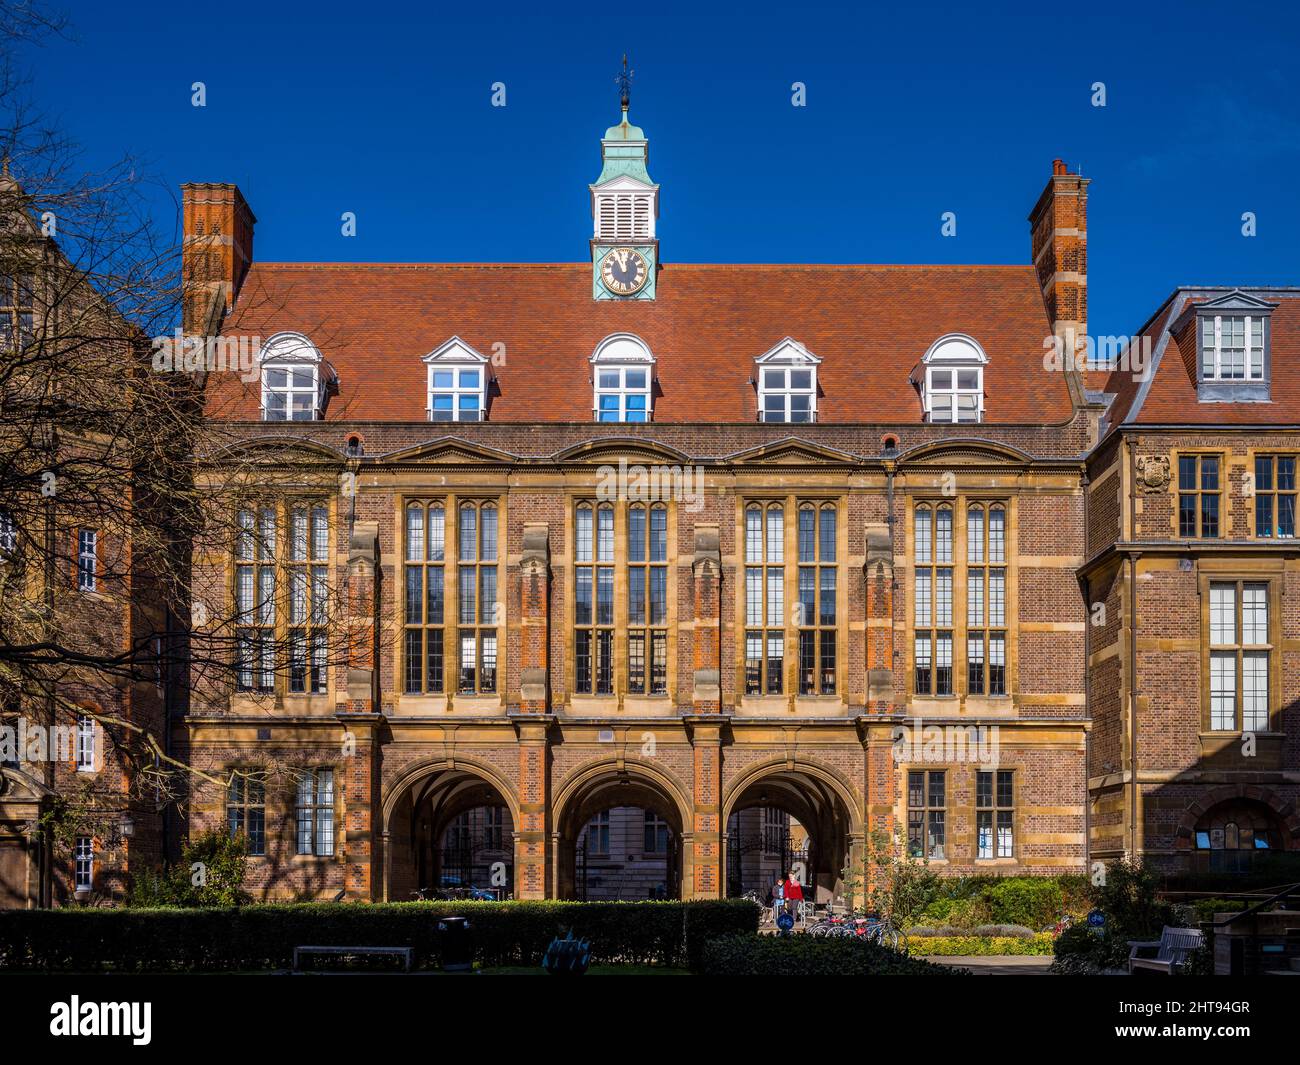 The Haddon Library Cambridge. The Haddon Library is part of the University of Cambridge. Founded by the pioneering anthropologist Alfred Haddon in 1920. Stock Photo